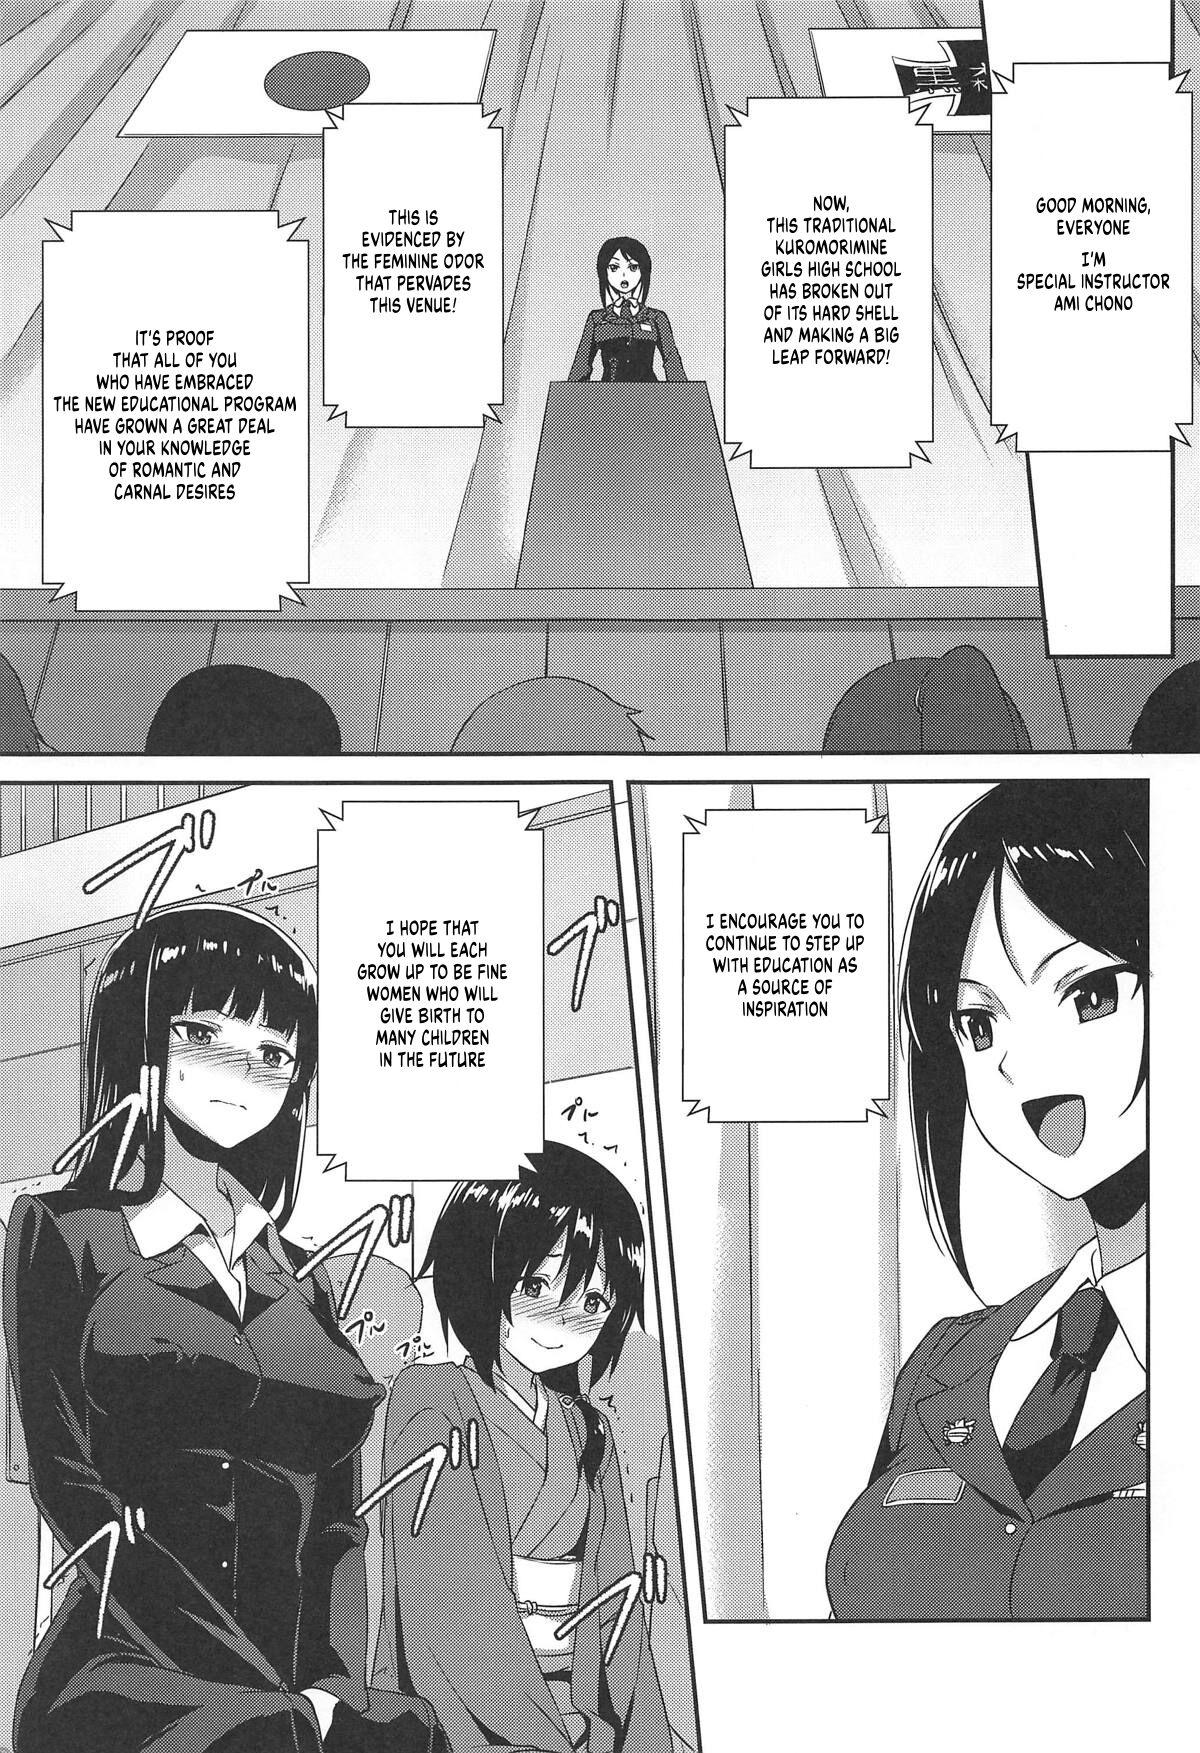 The Way How a Matriarch is Brought Up - Maho's Case, Bottom 25